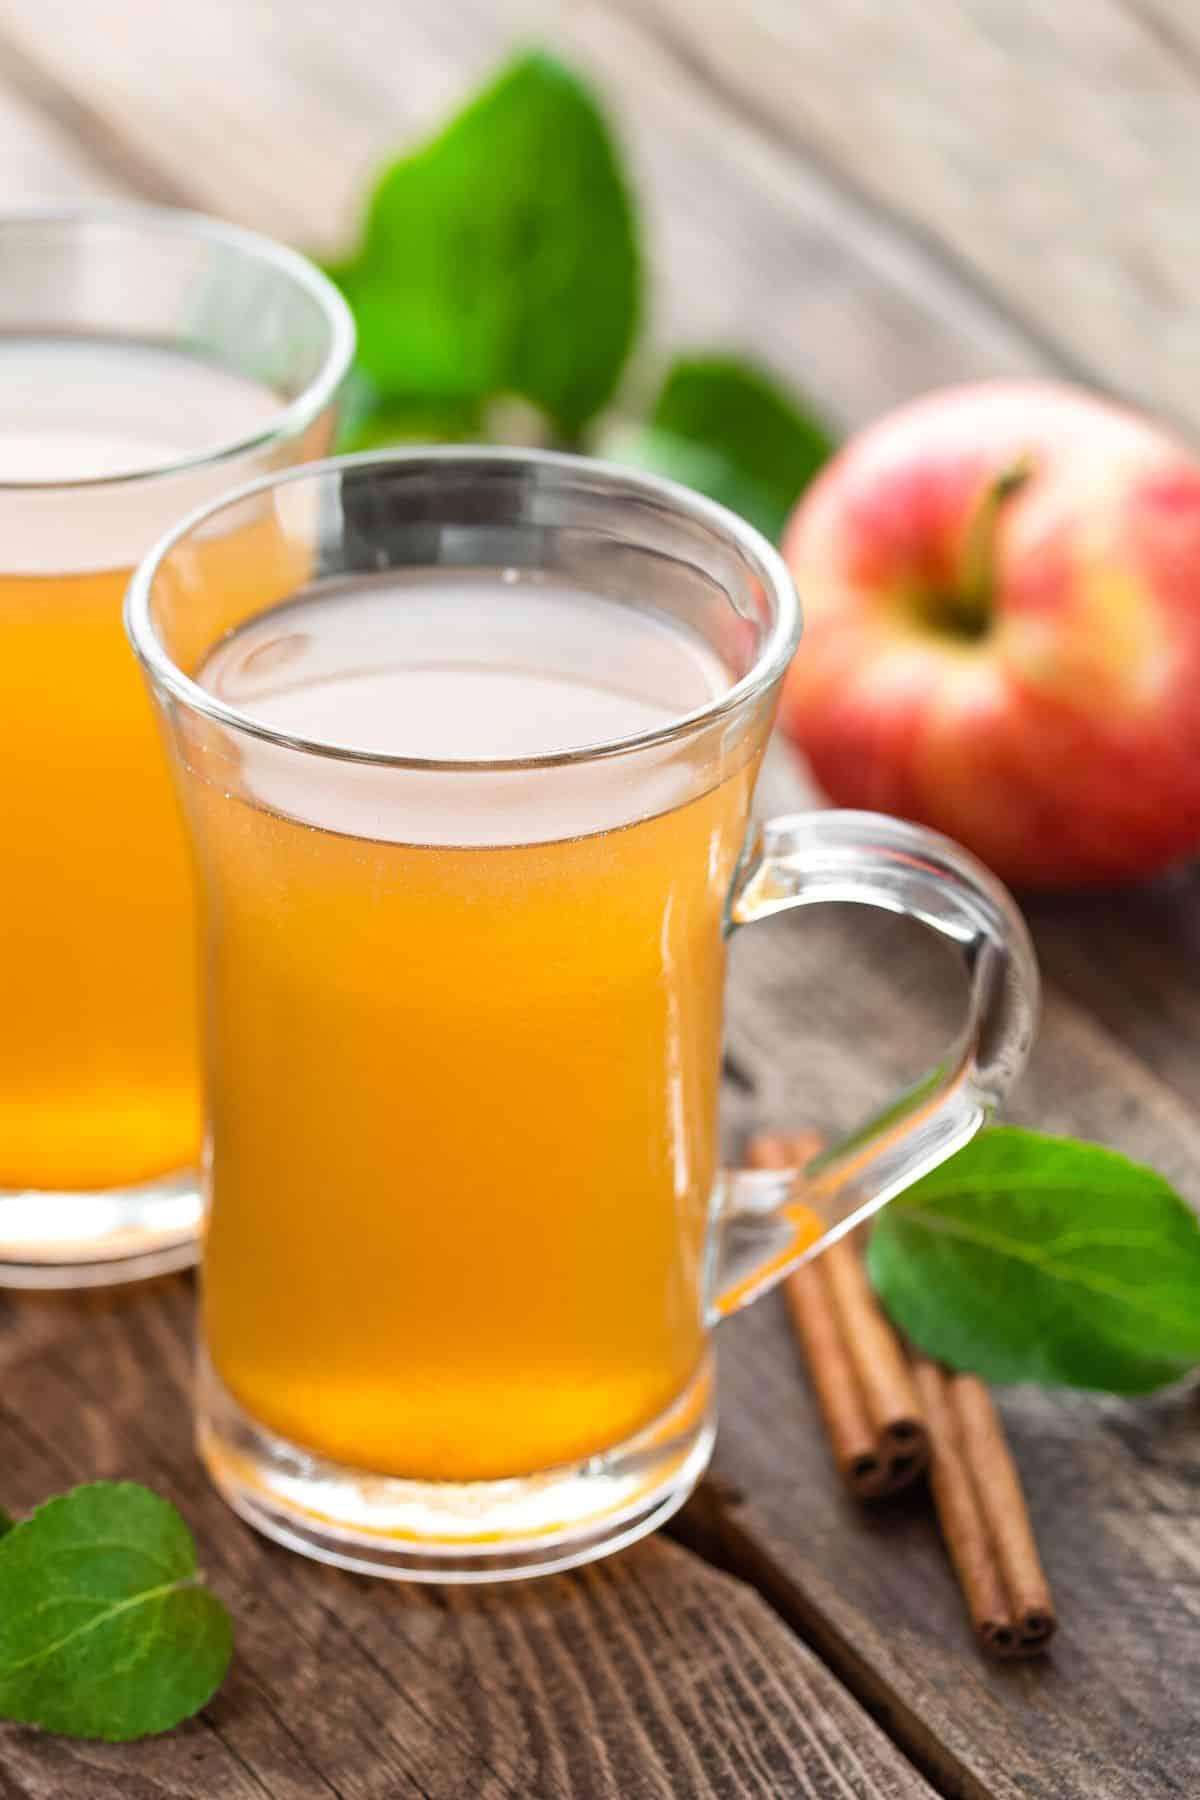 Two mugs of apple cider on a wooden table.